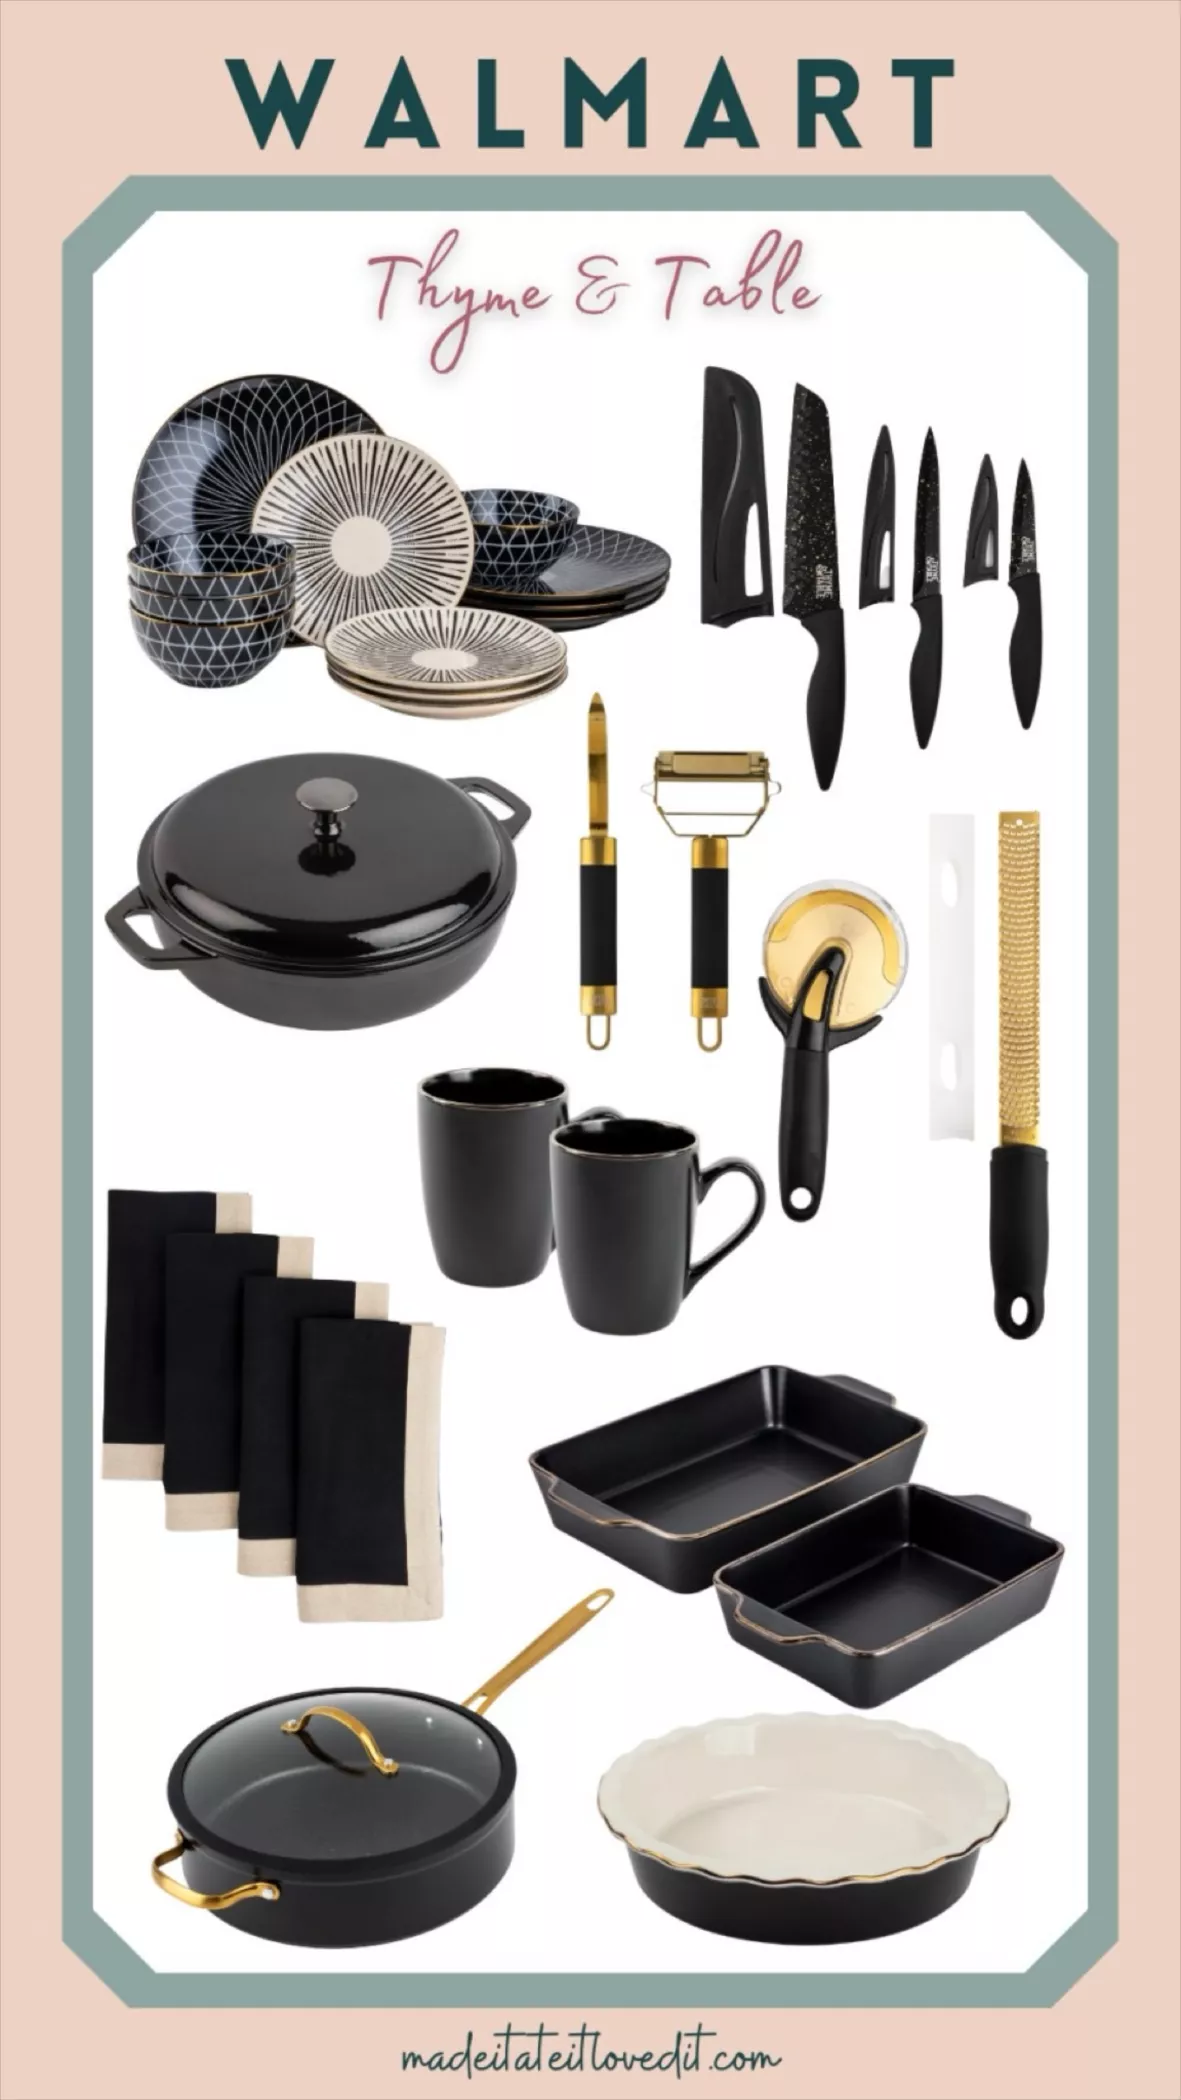 Cooking with Thyme & Table Kitchenware 